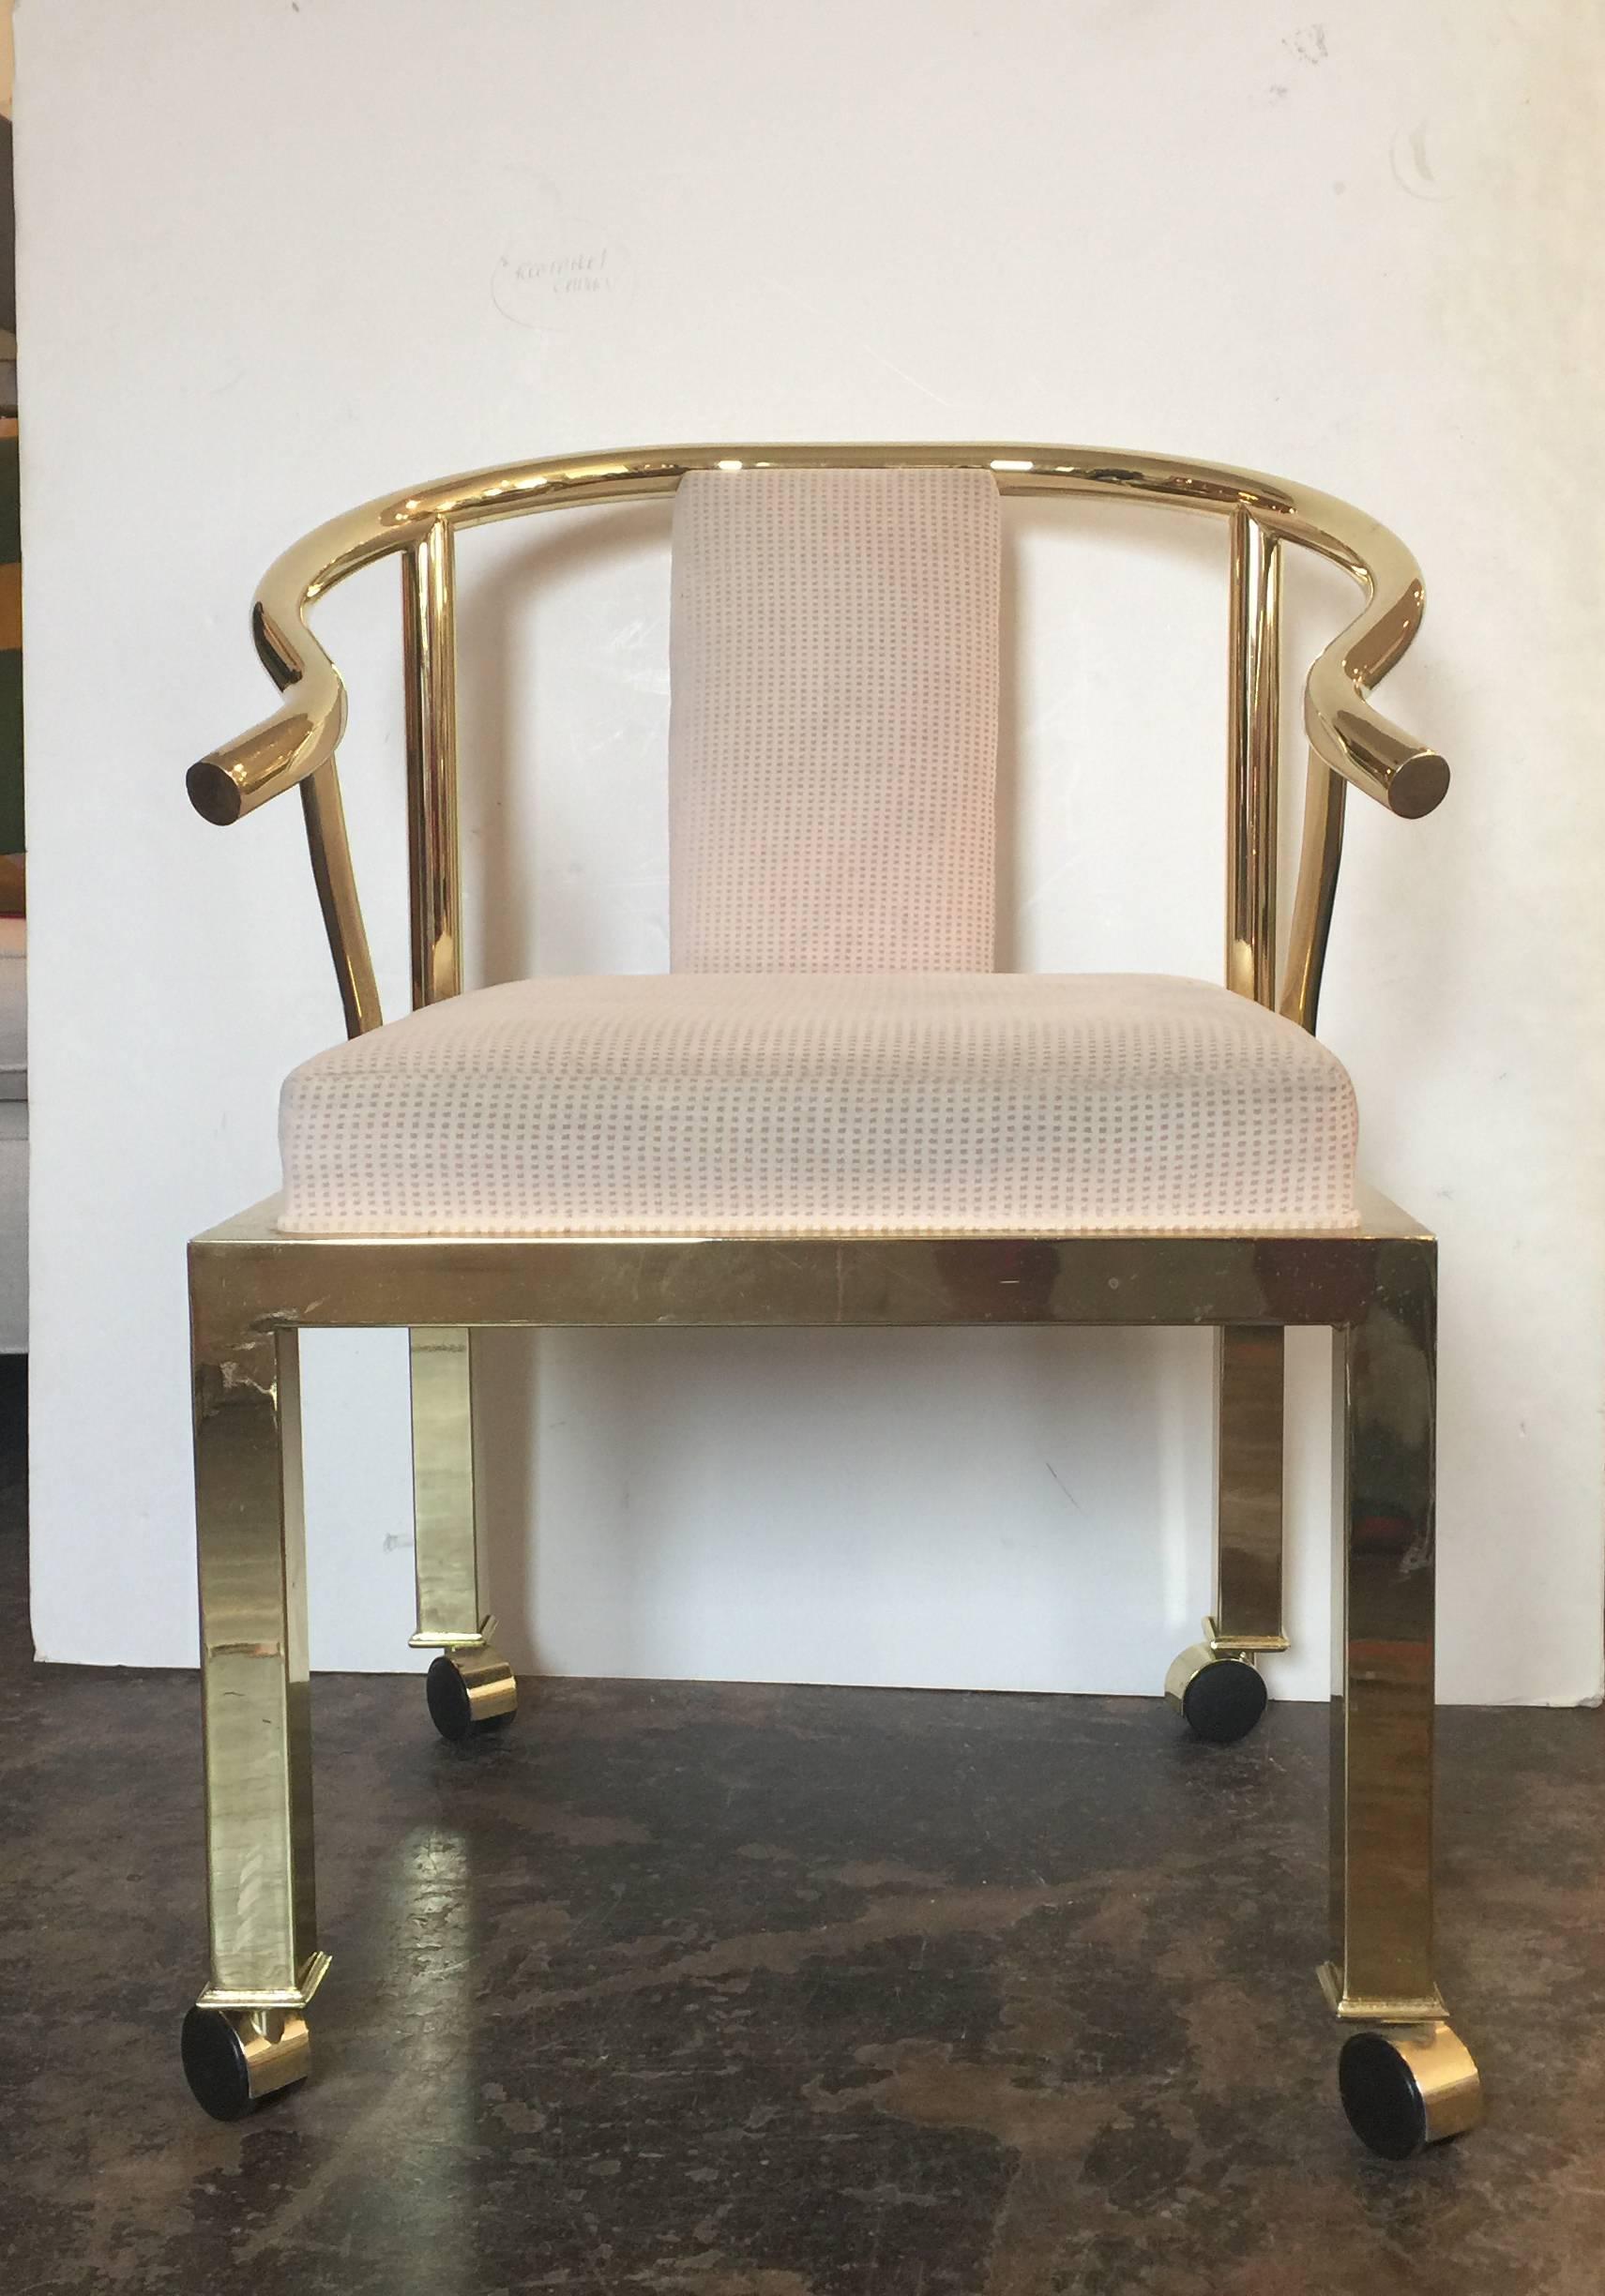 Single brass Ming chair by DIA.

Dimension: 24